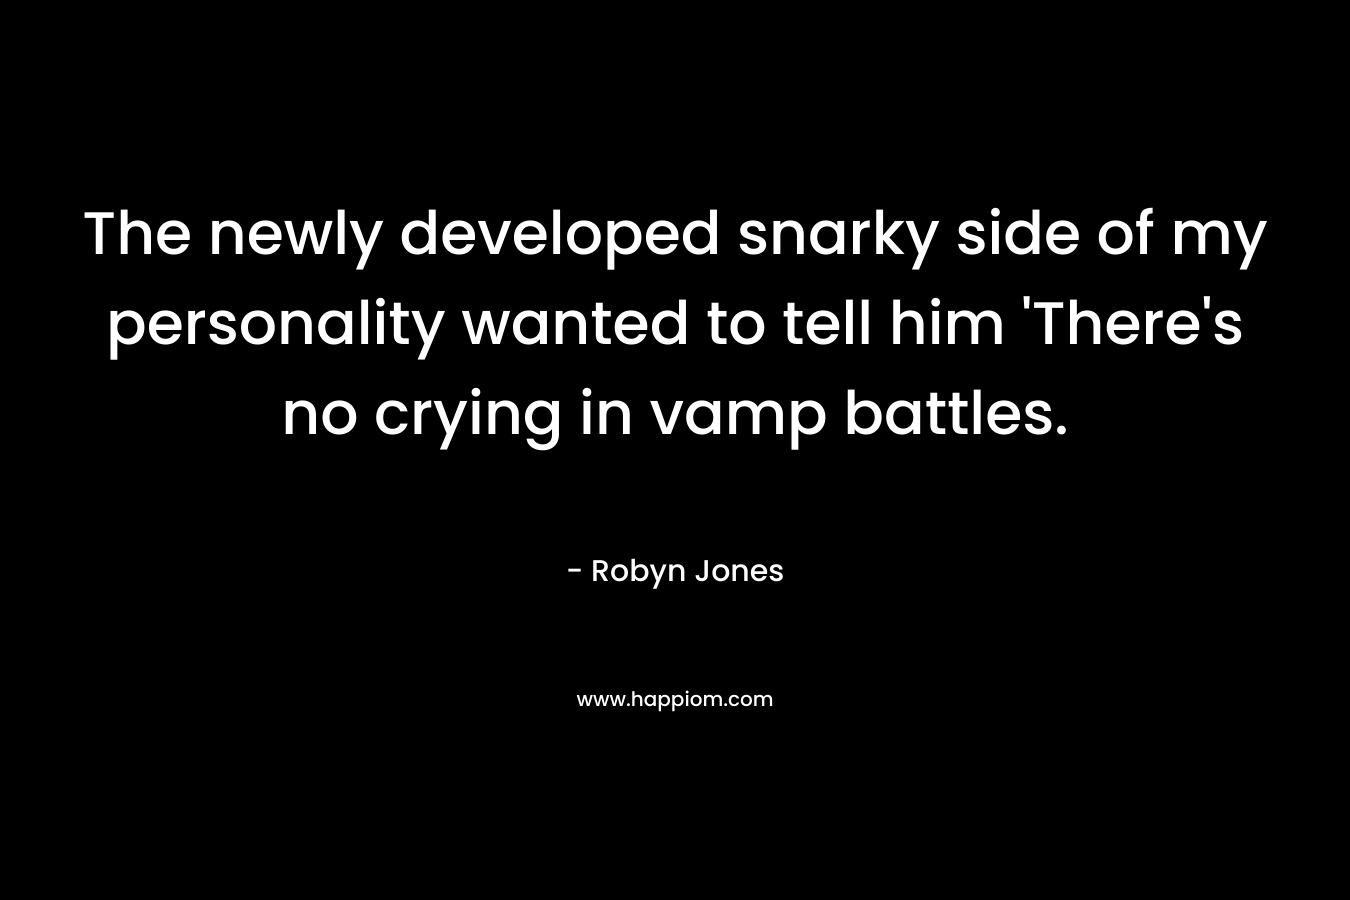 The newly developed snarky side of my personality wanted to tell him 'There's no crying in vamp battles.